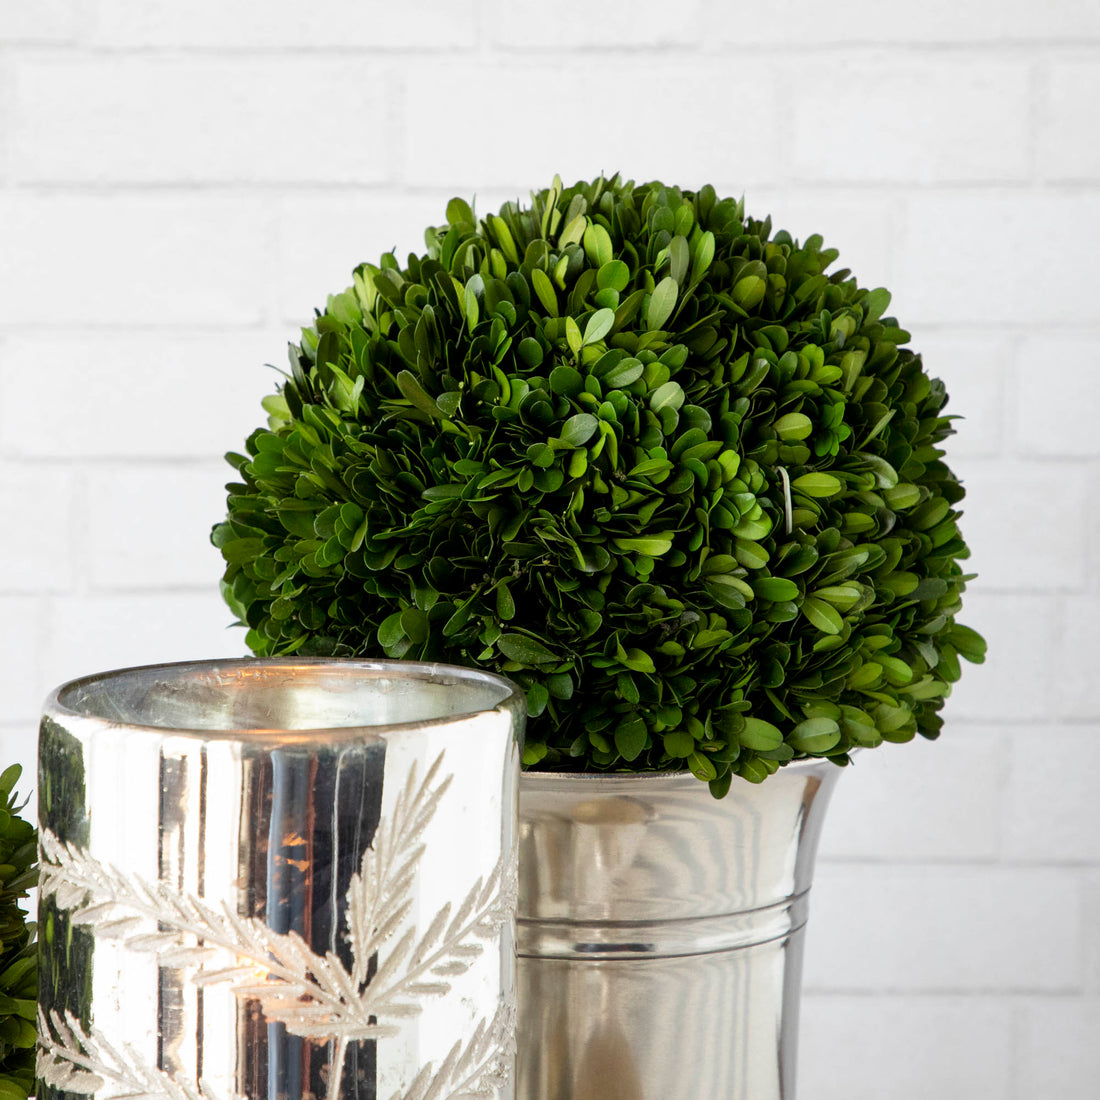 A lush green Mills Floral Company preserved boxwood balls topiary in a pot beside a decorative silver candle holder with a white brick background.